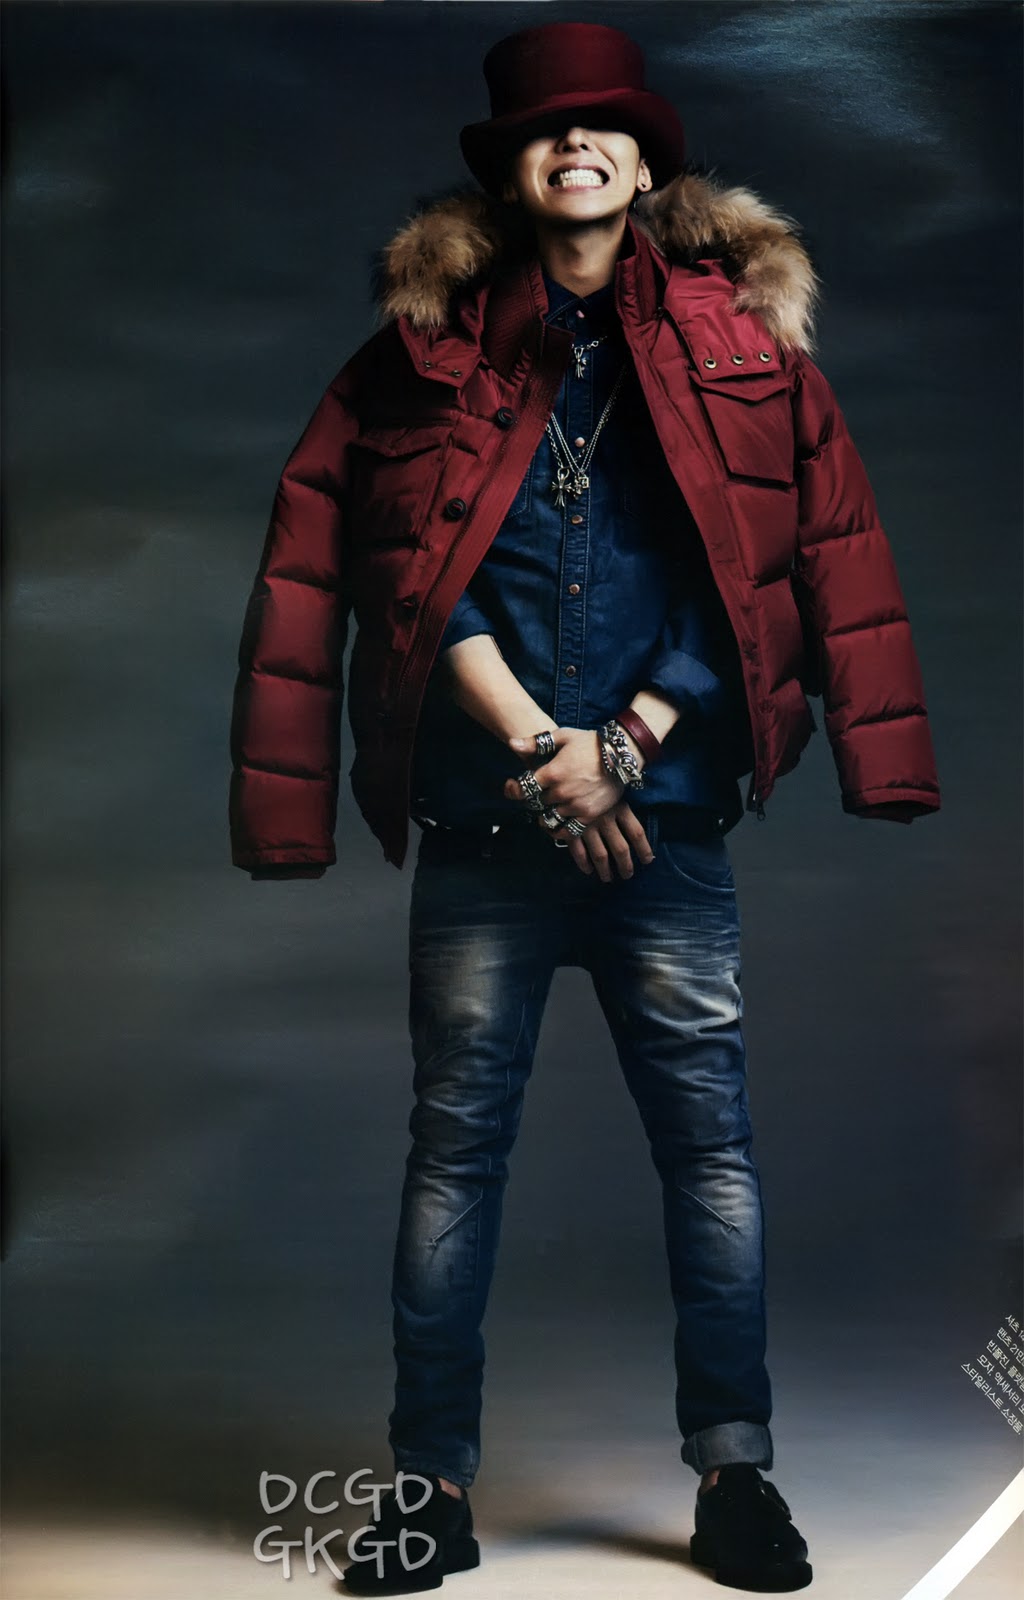 GDragon's Imagins Gdragon-1st-look-magazine-scans_094